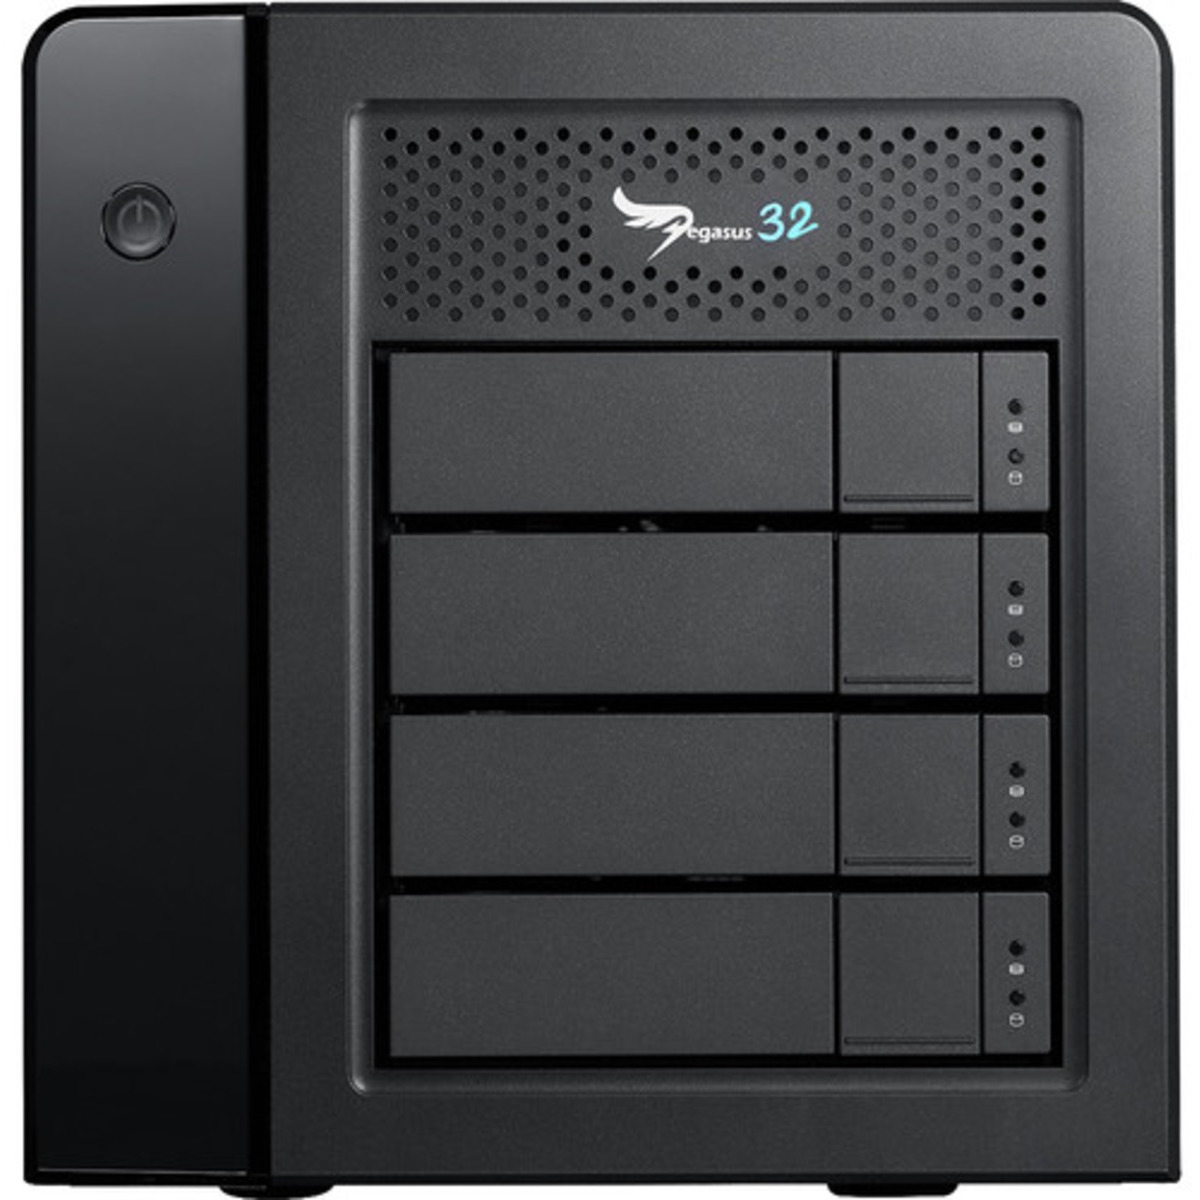 Promise Technology Pegasus32 R4 Thunderbolt 3 16tb 4-Bay Desktop Multimedia / Power User / Business DAS - Direct Attached Storage Device 4x4tb Samsung 870 EVO MZ-77E4T0BAM 2.5 560/530MB/s SATA 6Gb/s SSD CONSUMER Class Drives Installed - Burn-In Tested - ON SALE Pegasus32 R4 Thunderbolt 3